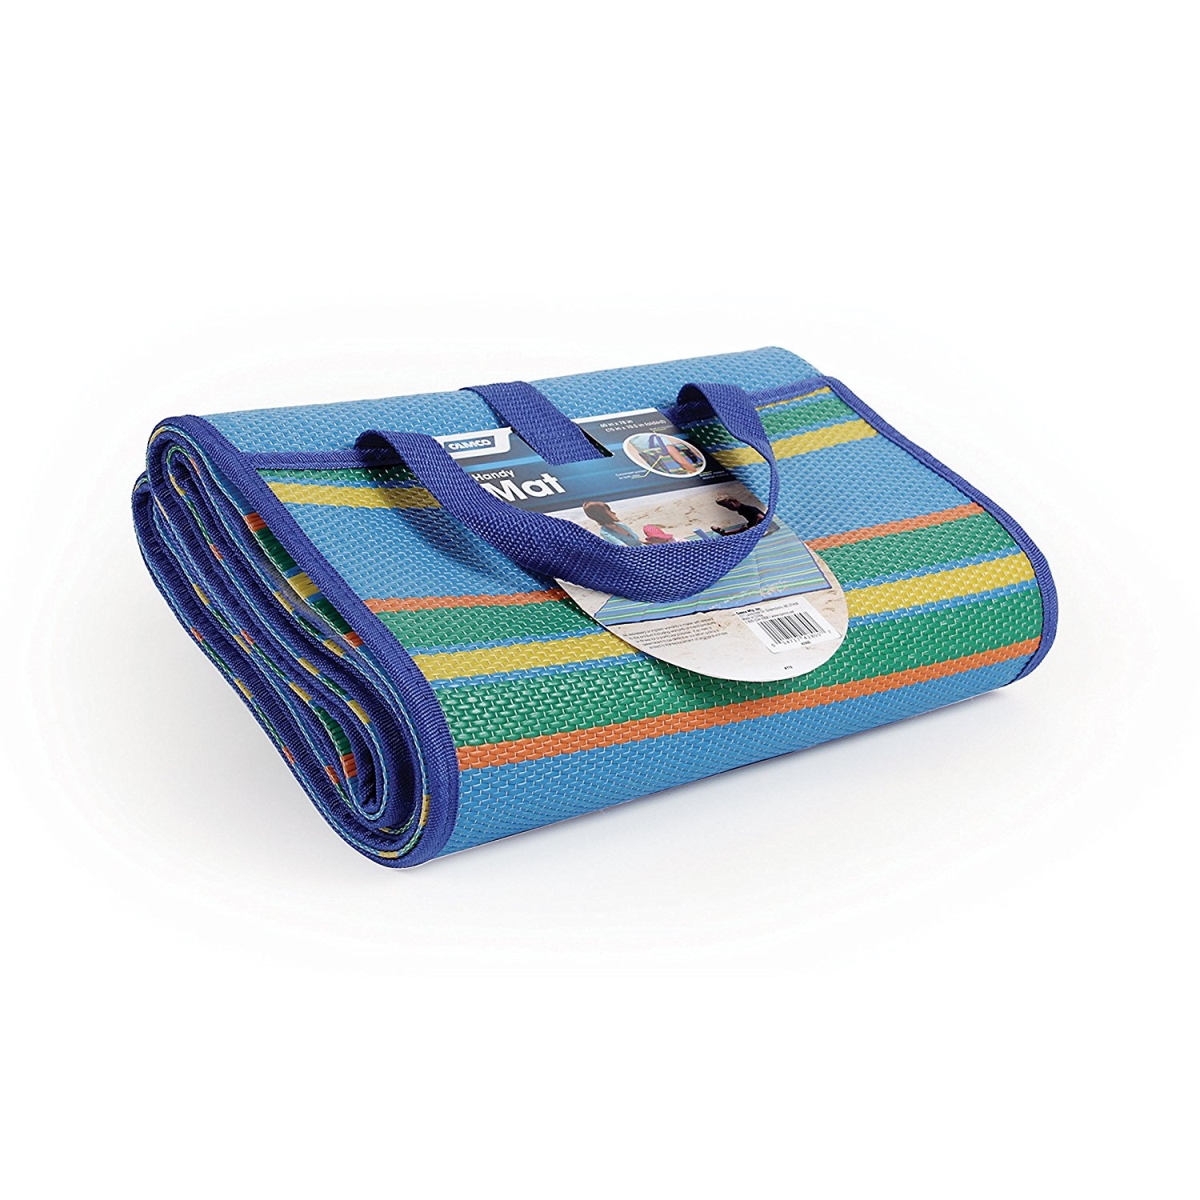 Picture of Camco C1W-42814 Striped Handy Mat with Strap - Blue & Green